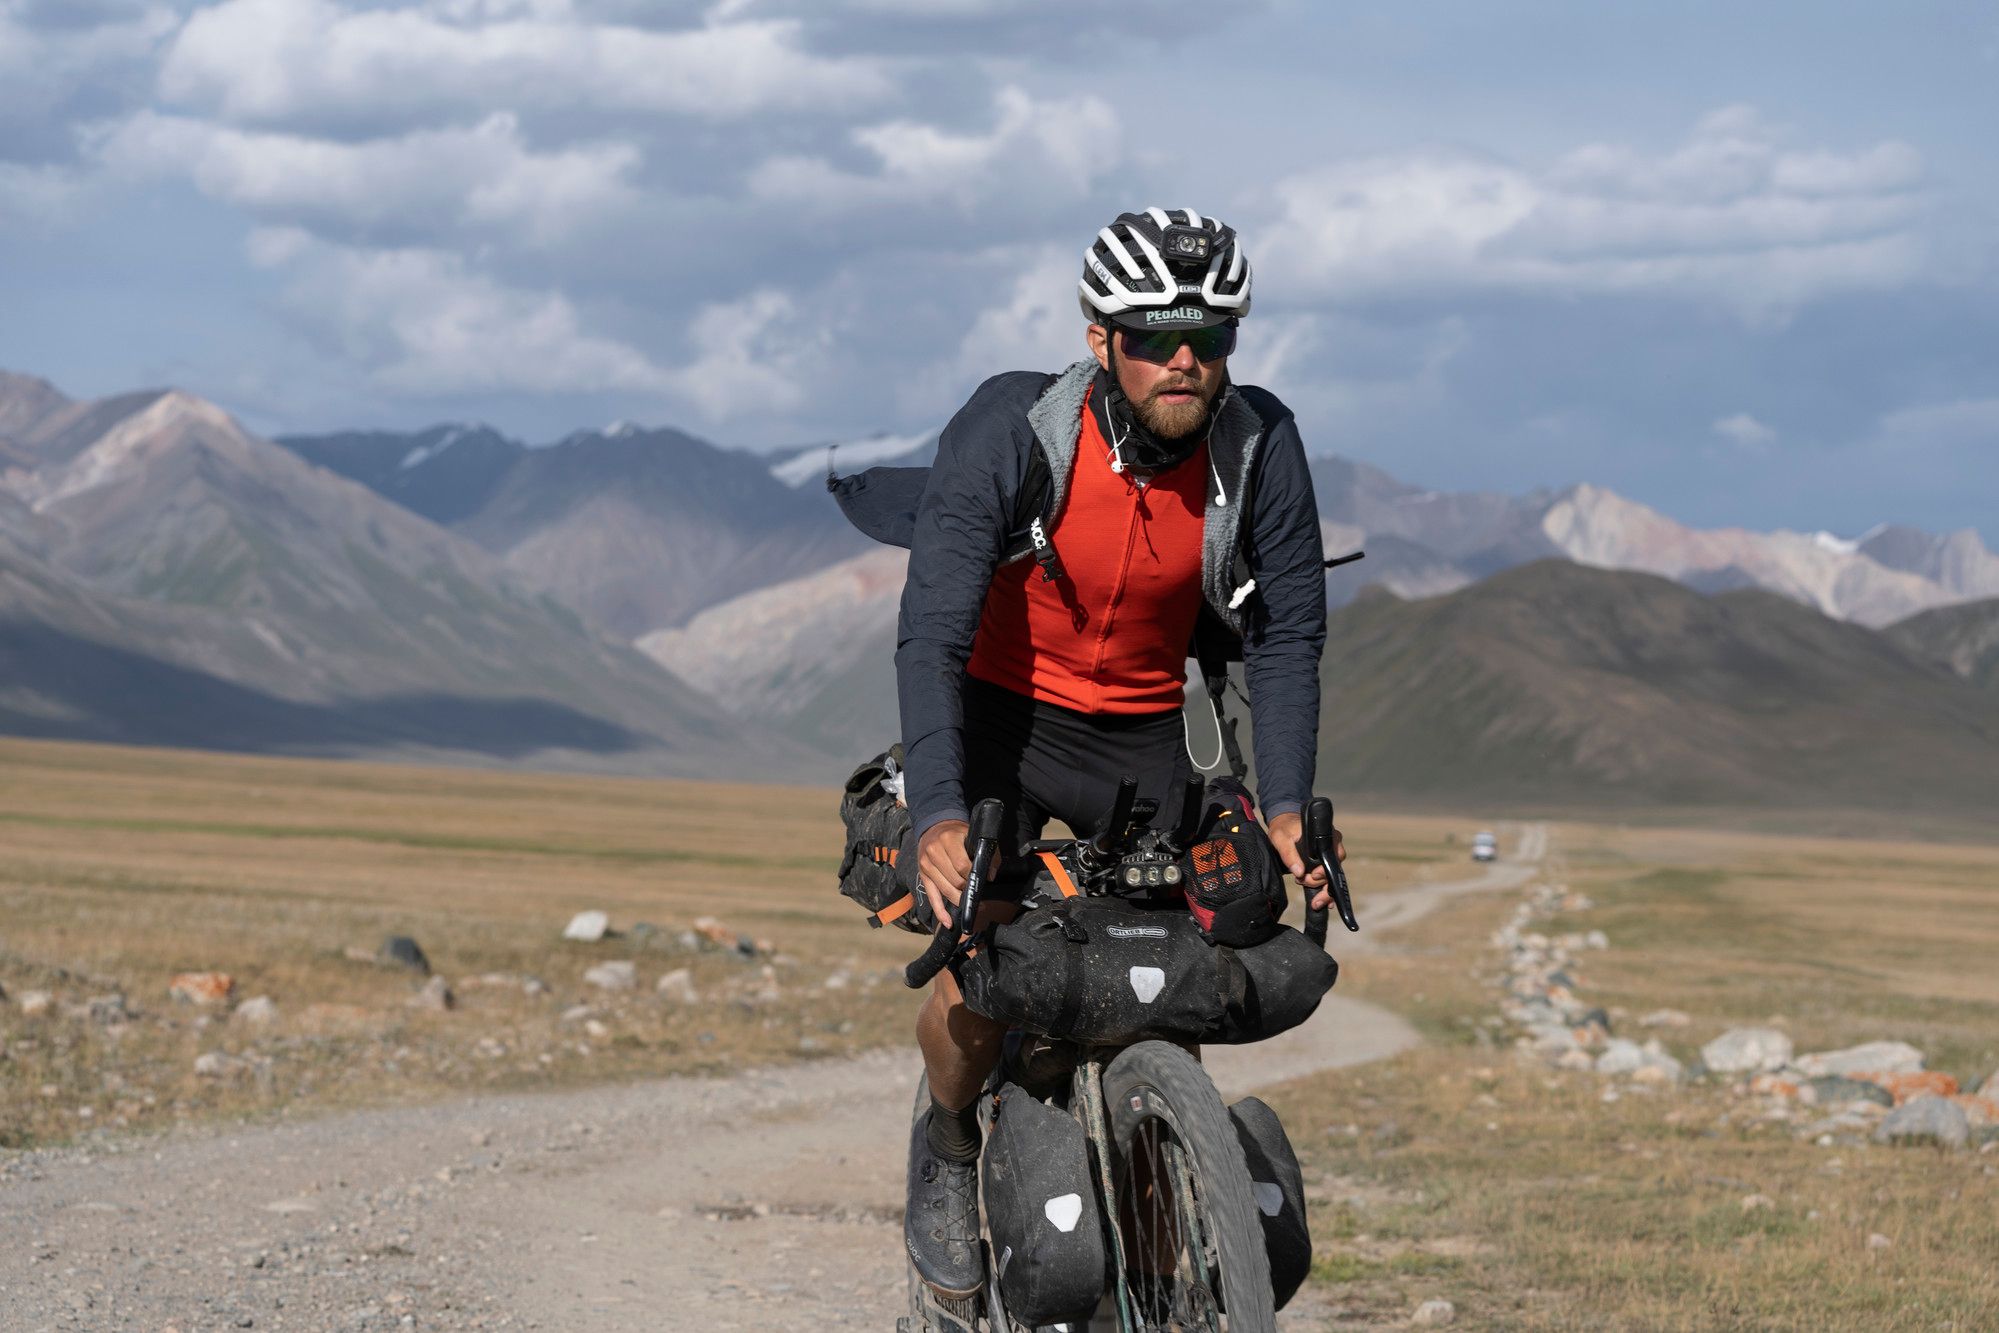 Riding the GT II prototypes during the Silkroad Mountainrace 2021